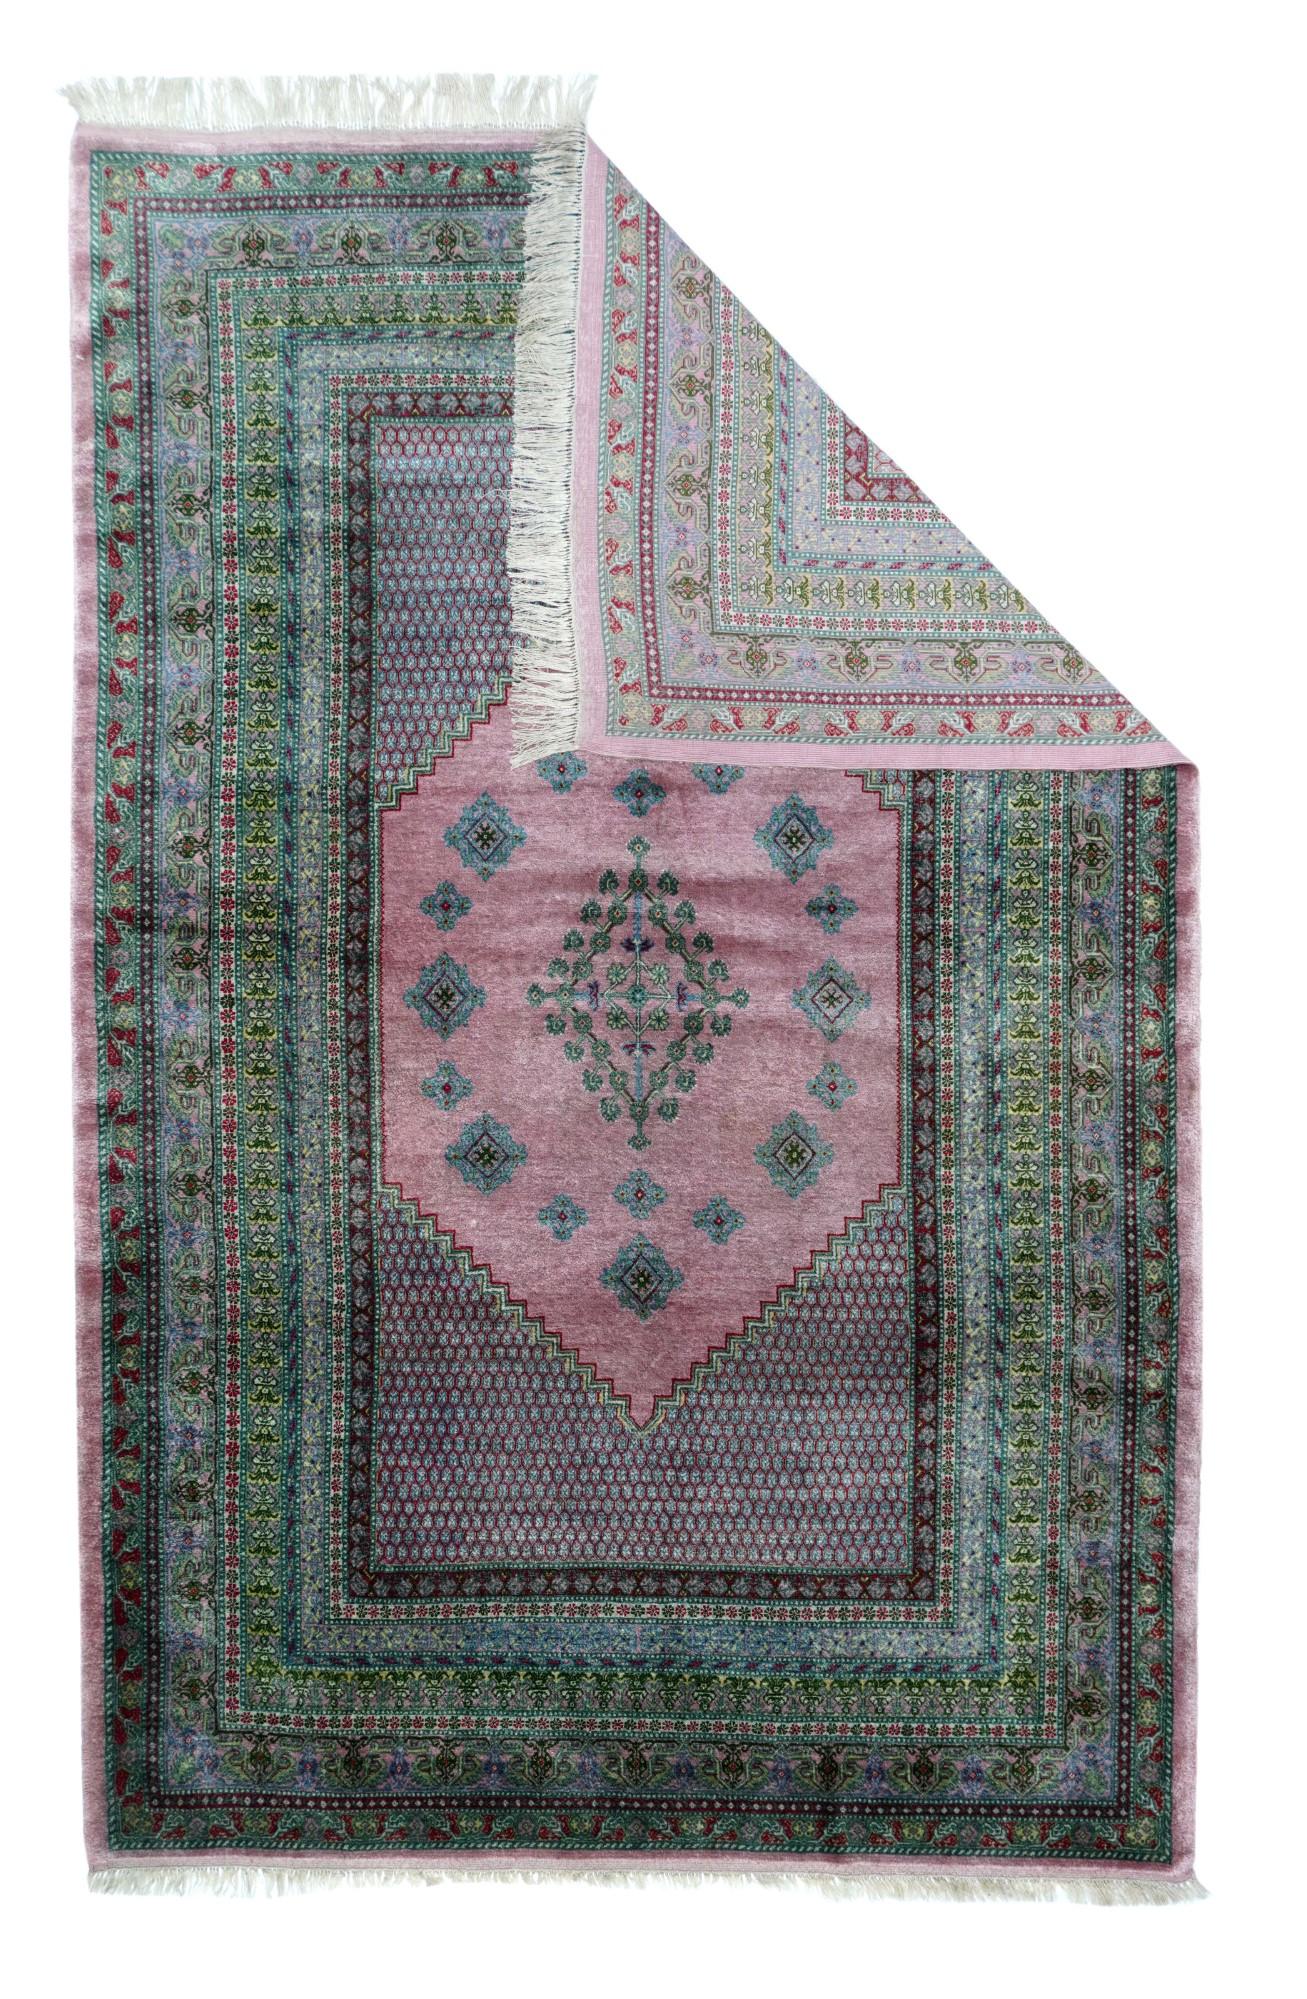 Vintage Indian Kashmiri rug measures 4'1'' x 6'3''. In good condition, this finely knotted scatter rug shows a pearly palette of sandy beige, light blue, light brown and pale green. The style is essentially Anatolian, but refined and elaborated in